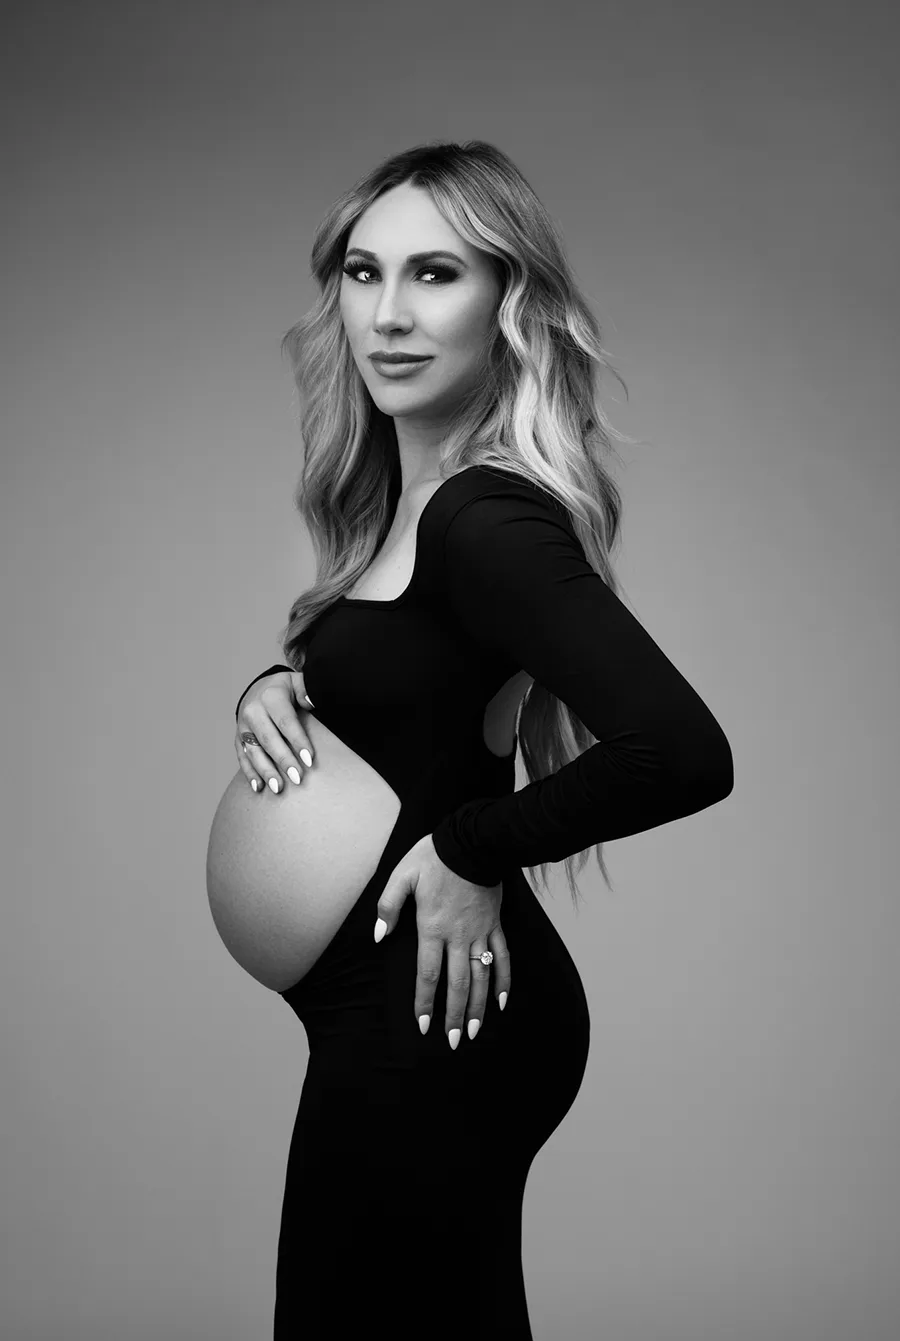 maternity portrait of a pregnant woman wearing a black dress with belly exposed taken by Andrea Liora Studios in San Francisco CA.